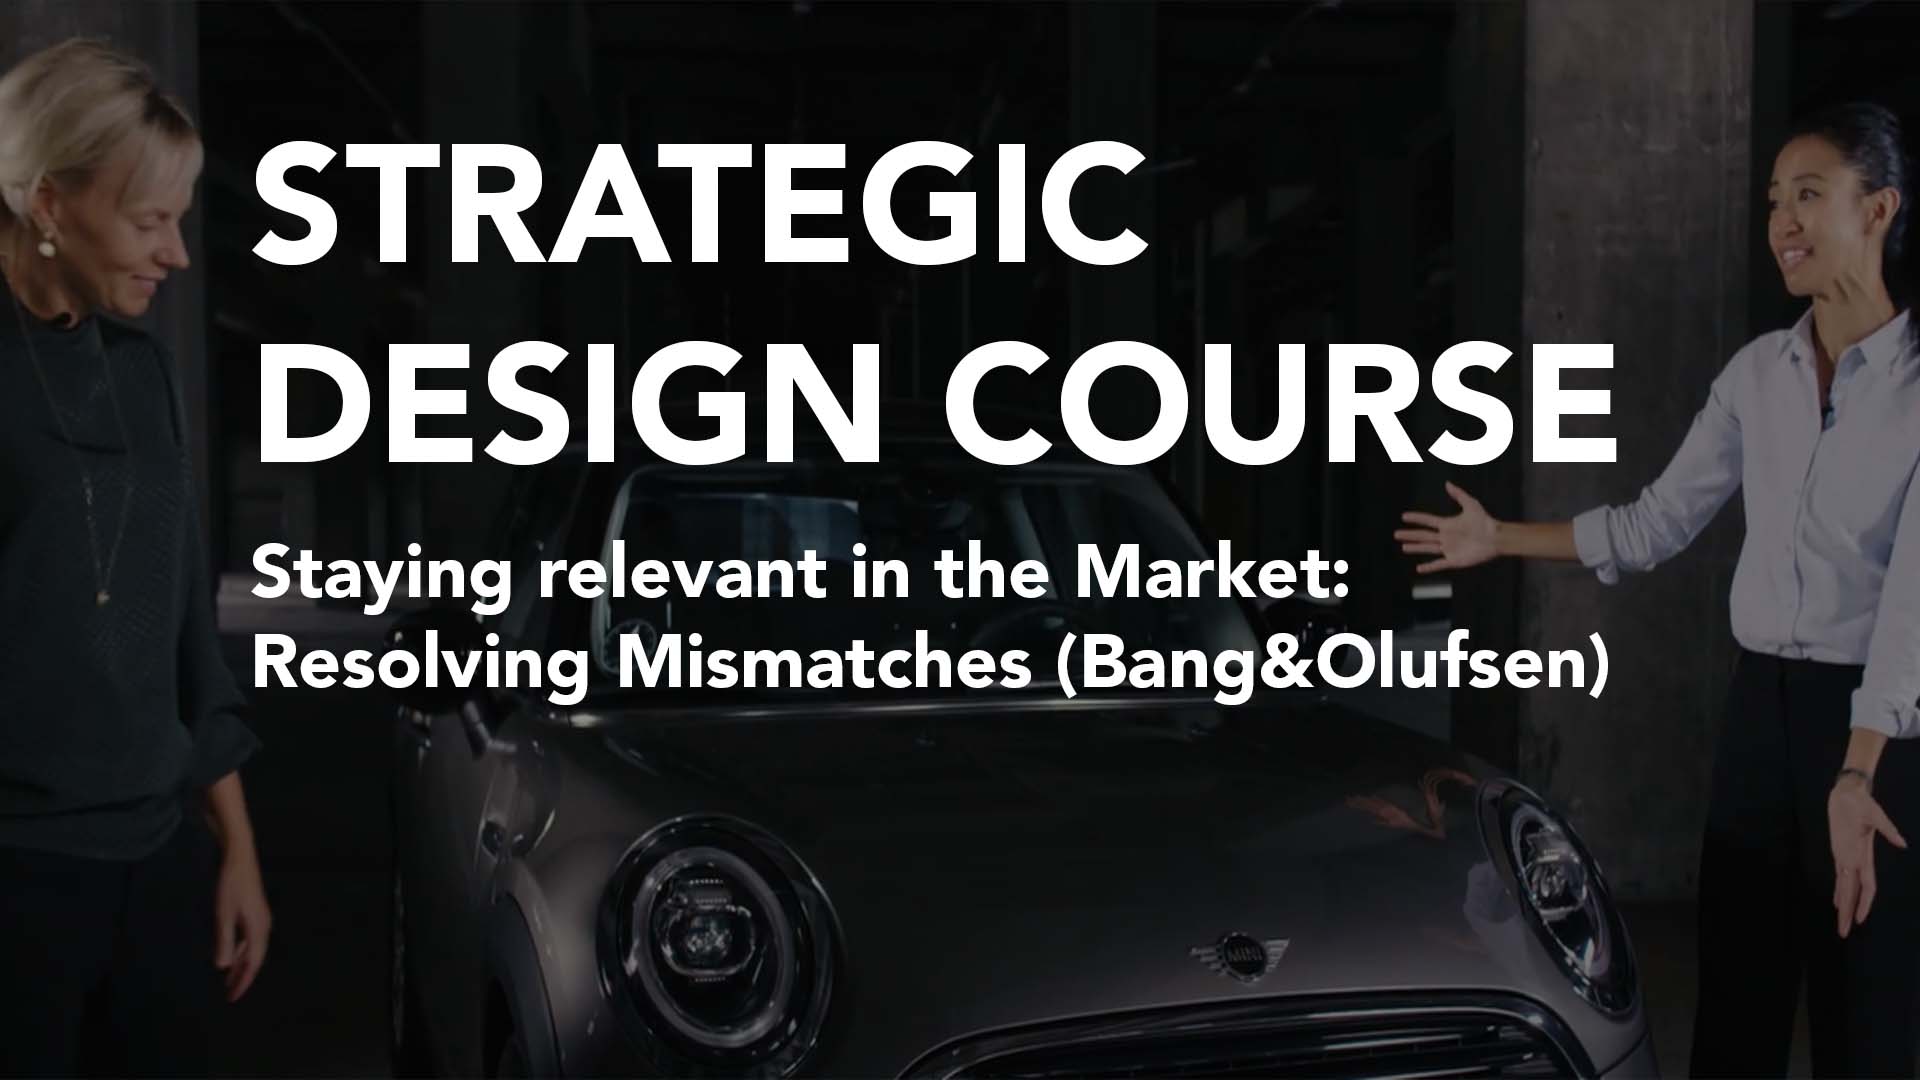 Staying Relevant in the Market: Resolving Mismatches (Bang & Olufsen) | Strategic Design Course